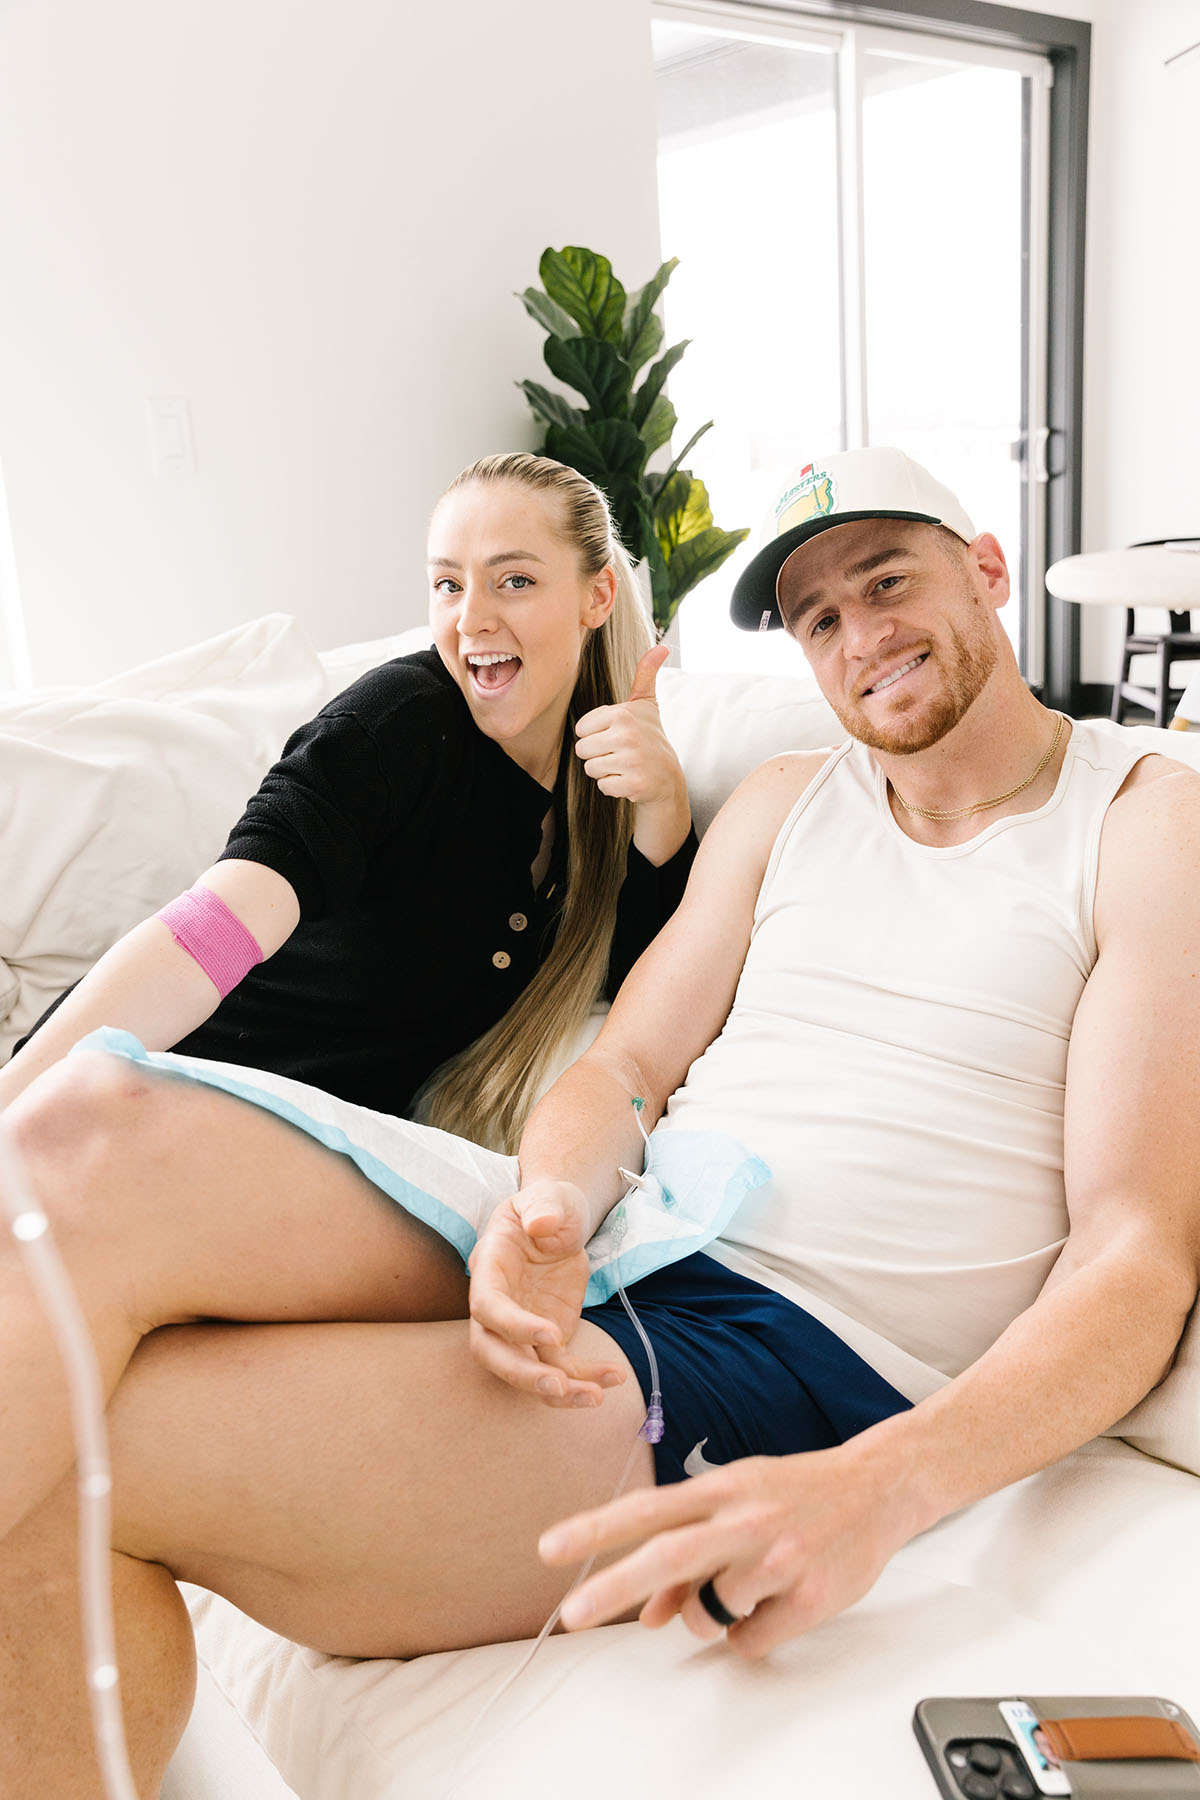 Smiling couple getting IV therapy at home